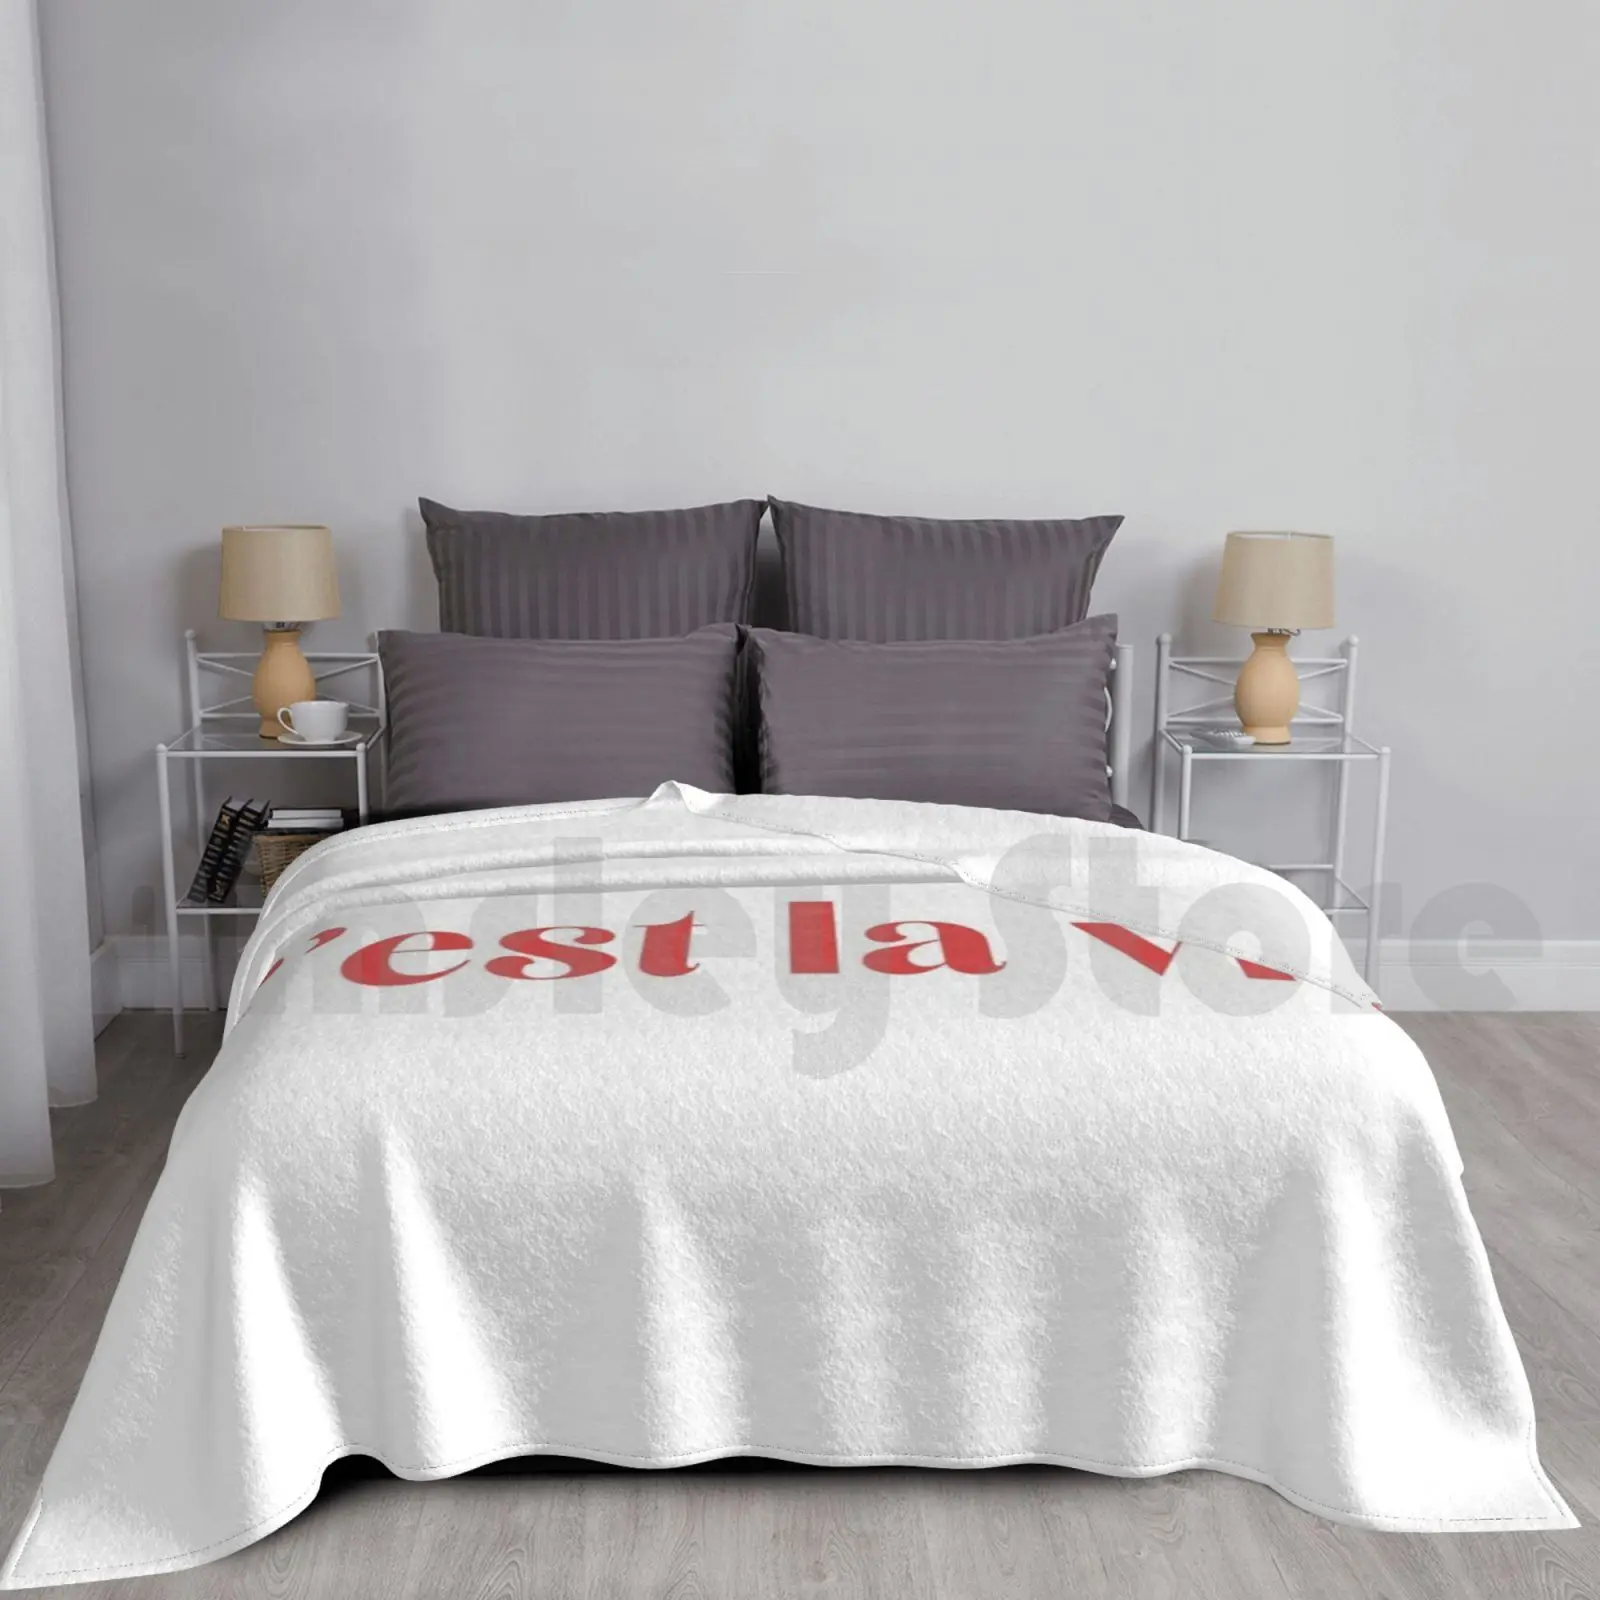 

C'est La Vie-That's Life Blanket For Sofa Bed Travel Its Life French French Words Paris France Thats Life Fun